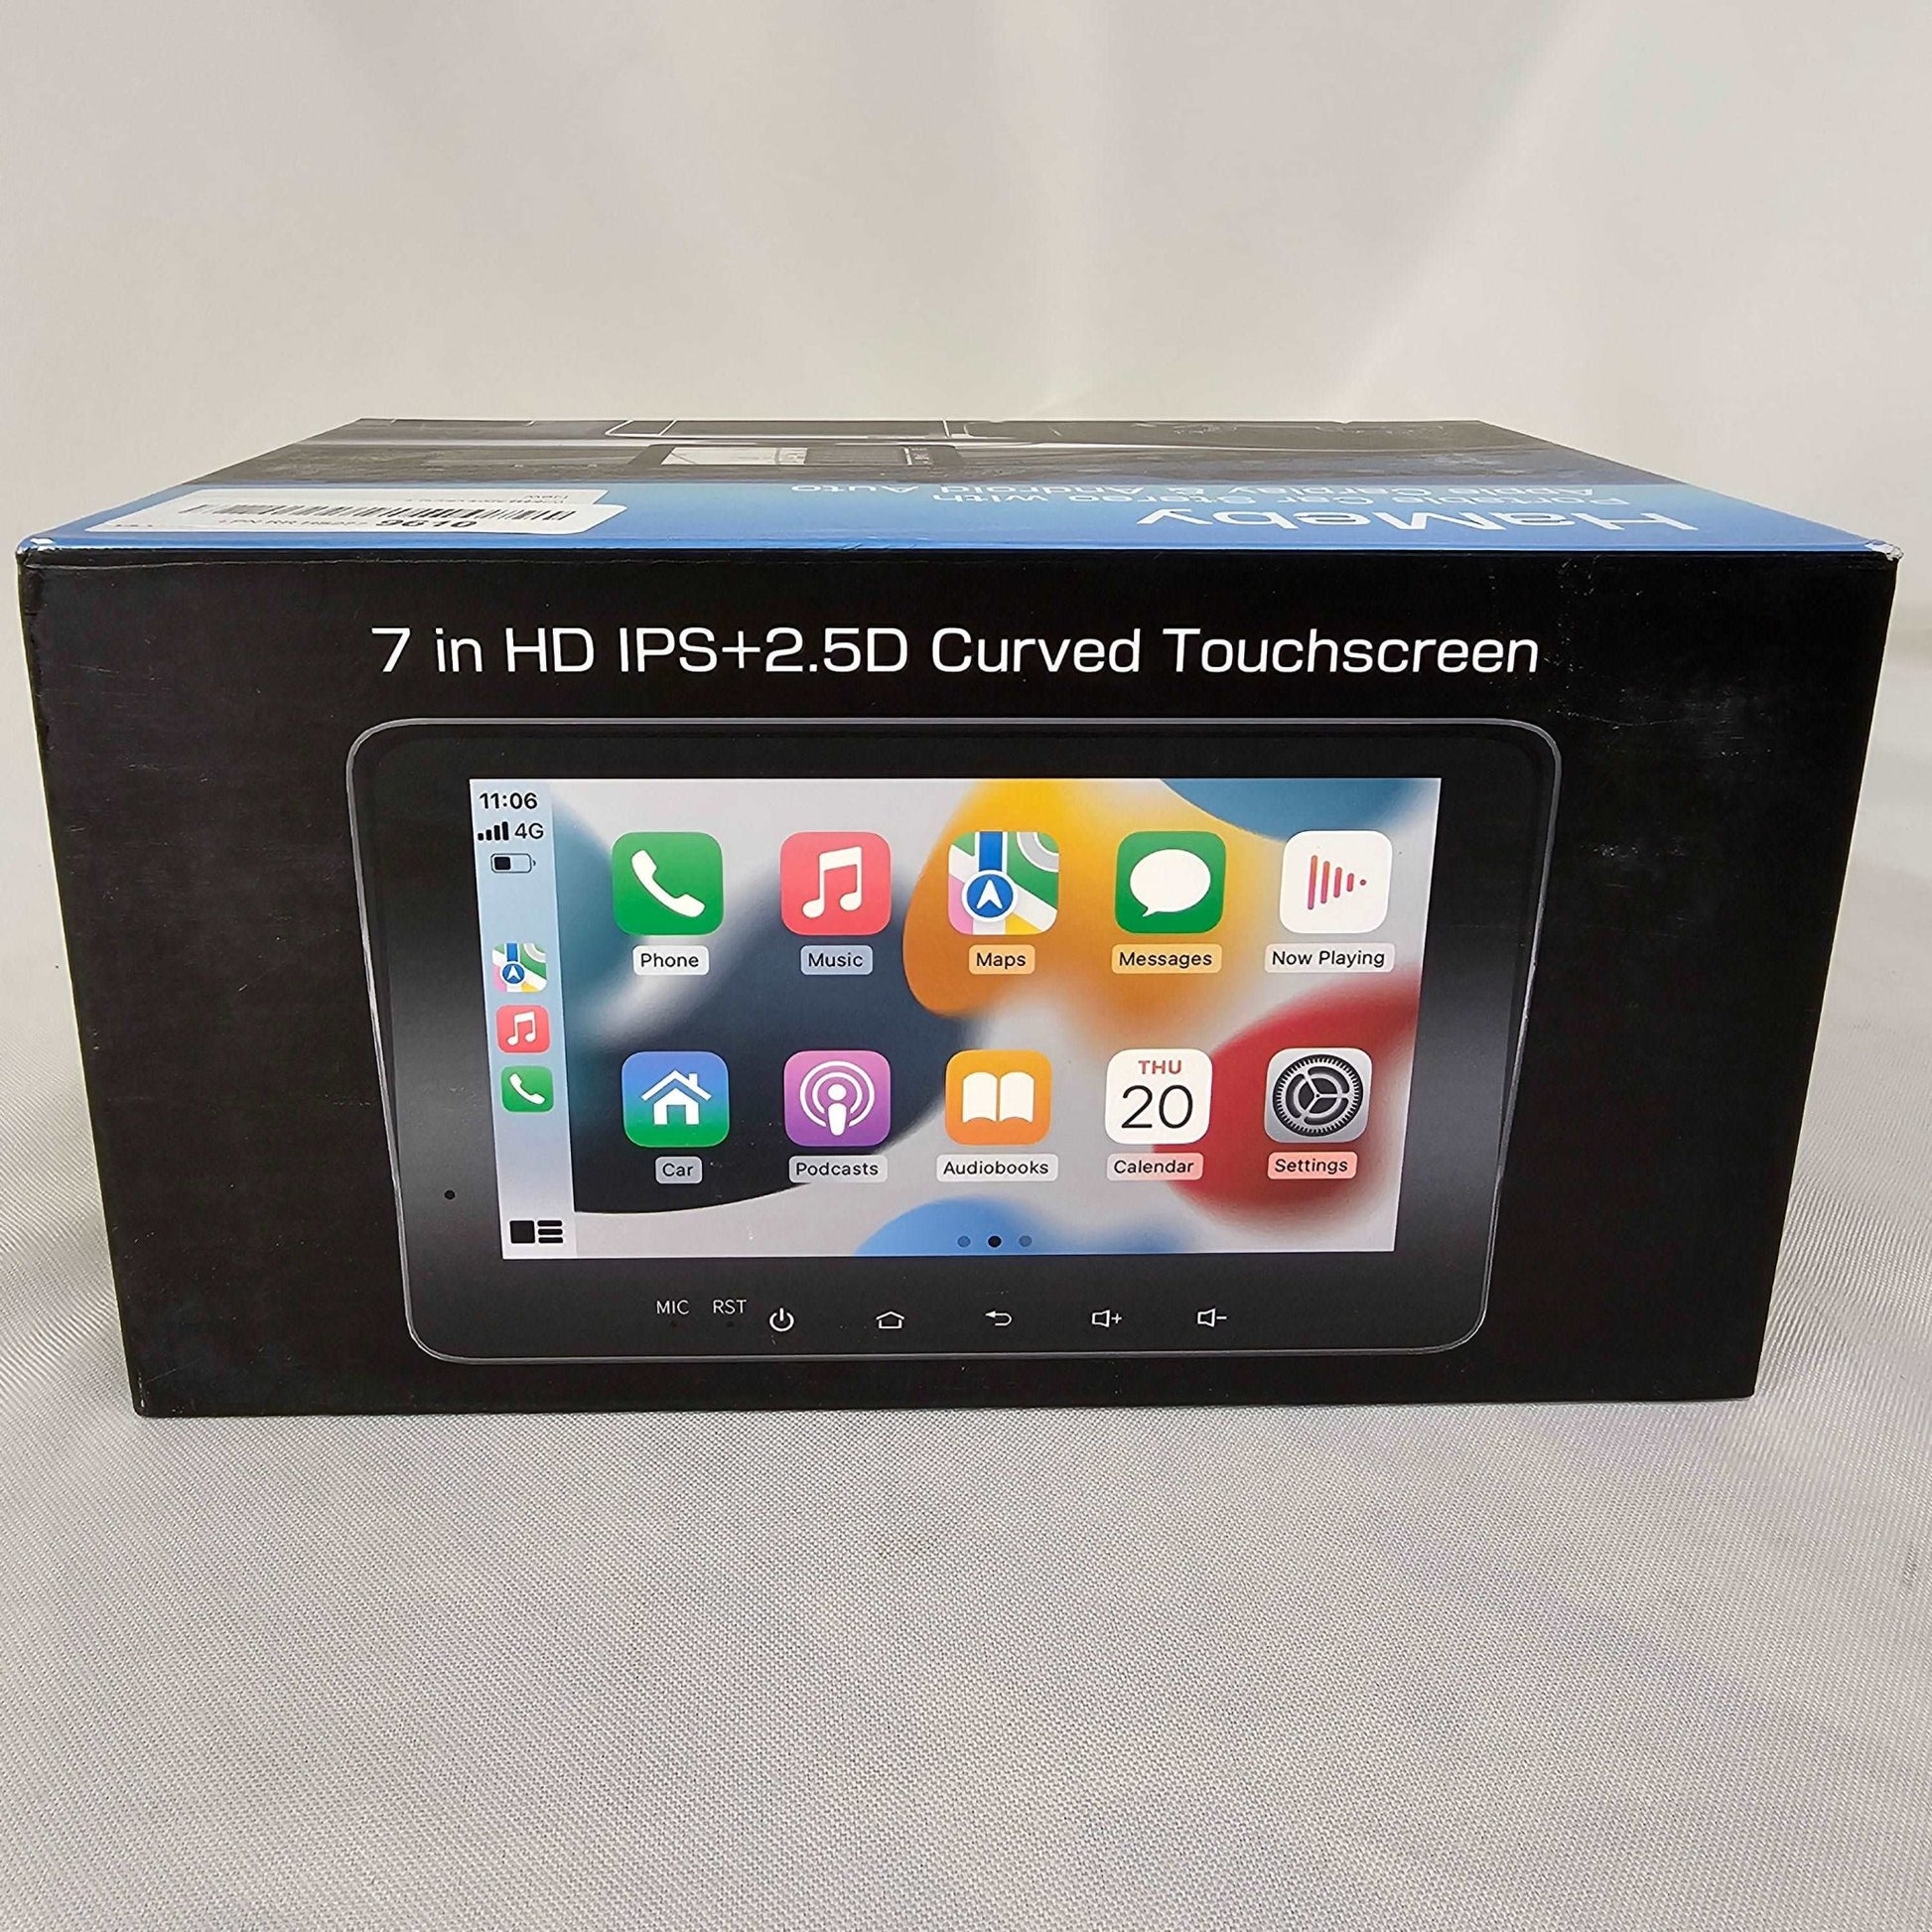 1080 HD Portable Car Stereo with Apple Carplay & Android HaMeby B5310 - DQ Distribution